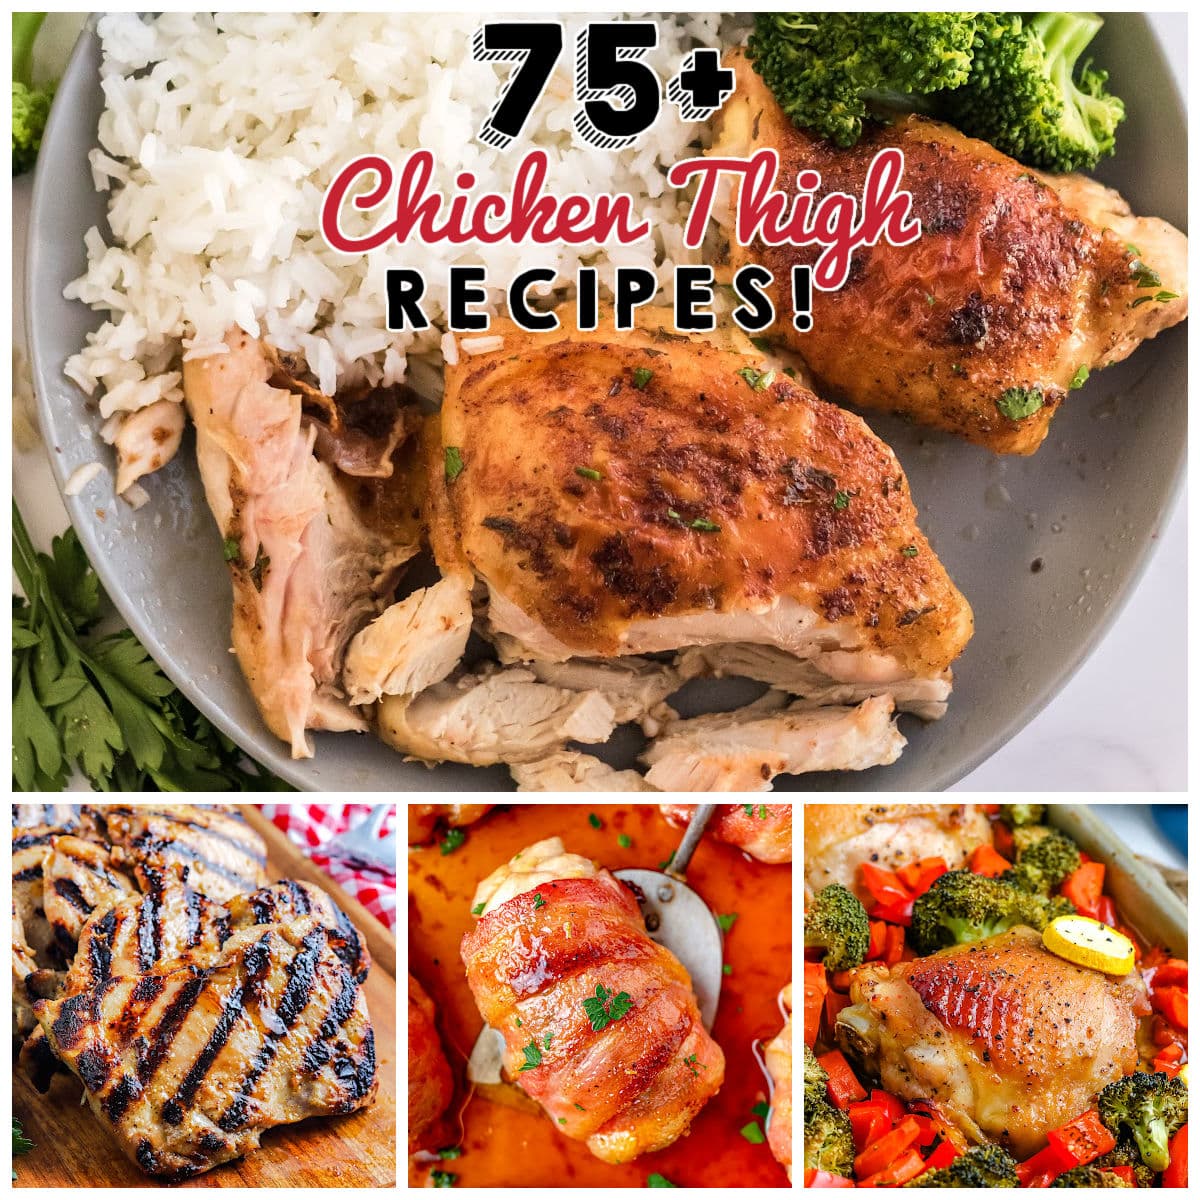 A picture collage of Chicken Thigh Recipes with text overlay for social media.